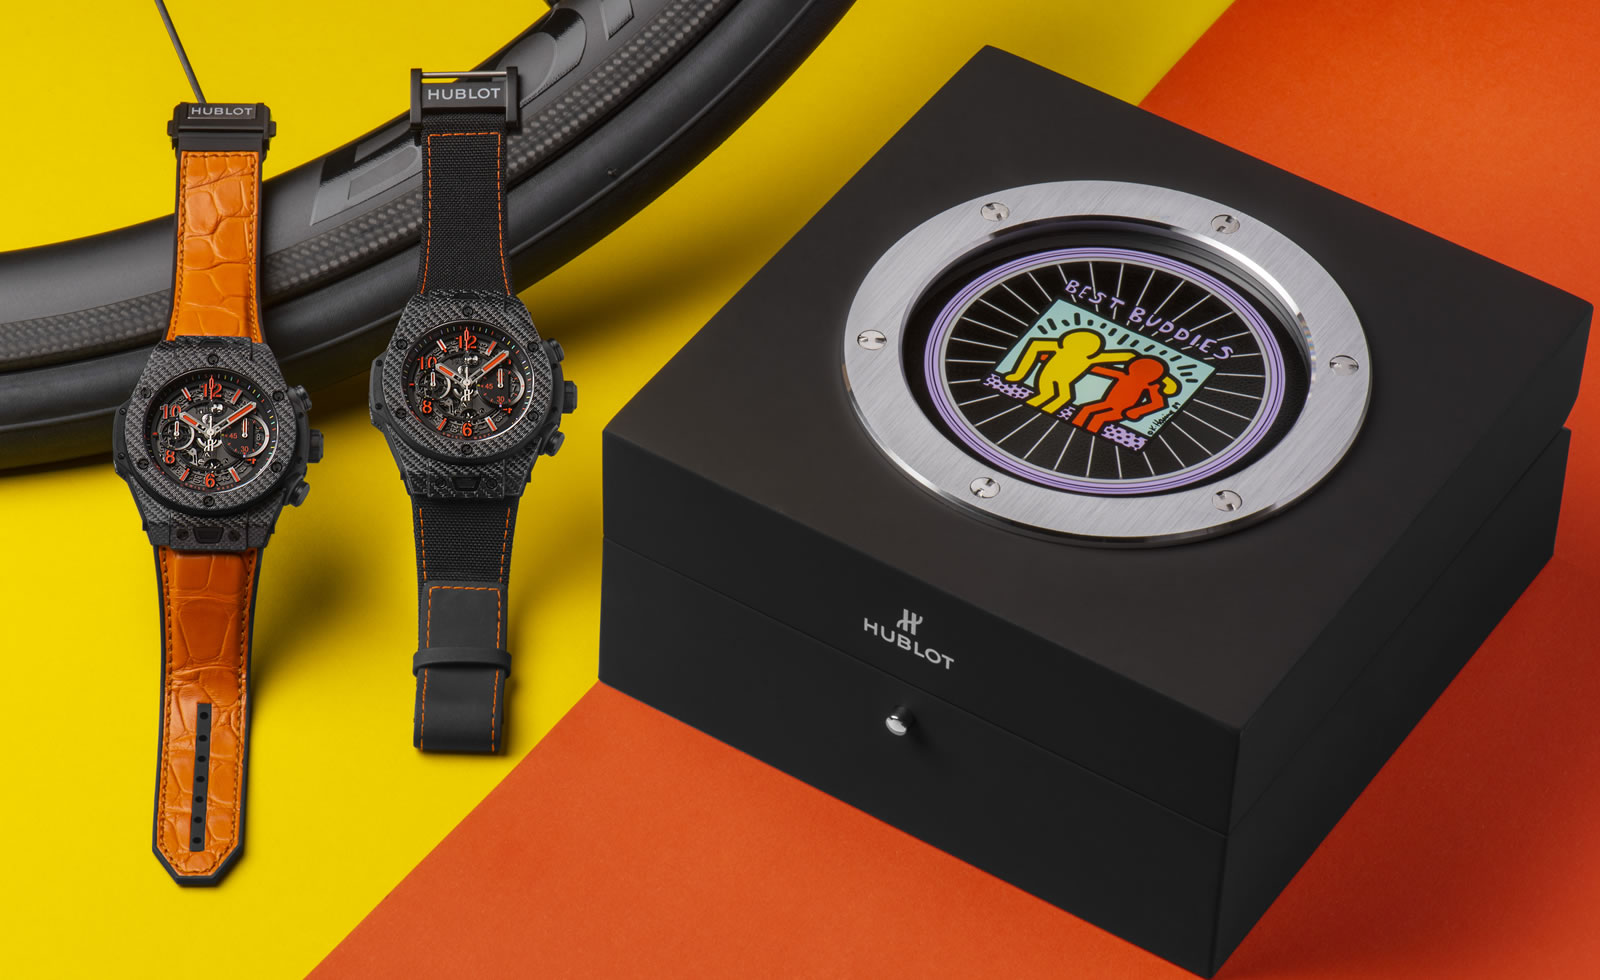 HUBLOT UNVEILS NEW LIMITED EDITION WITH BEST BUDDIES INTERNATIONAL IN THE SAN FRANCISCO BAY